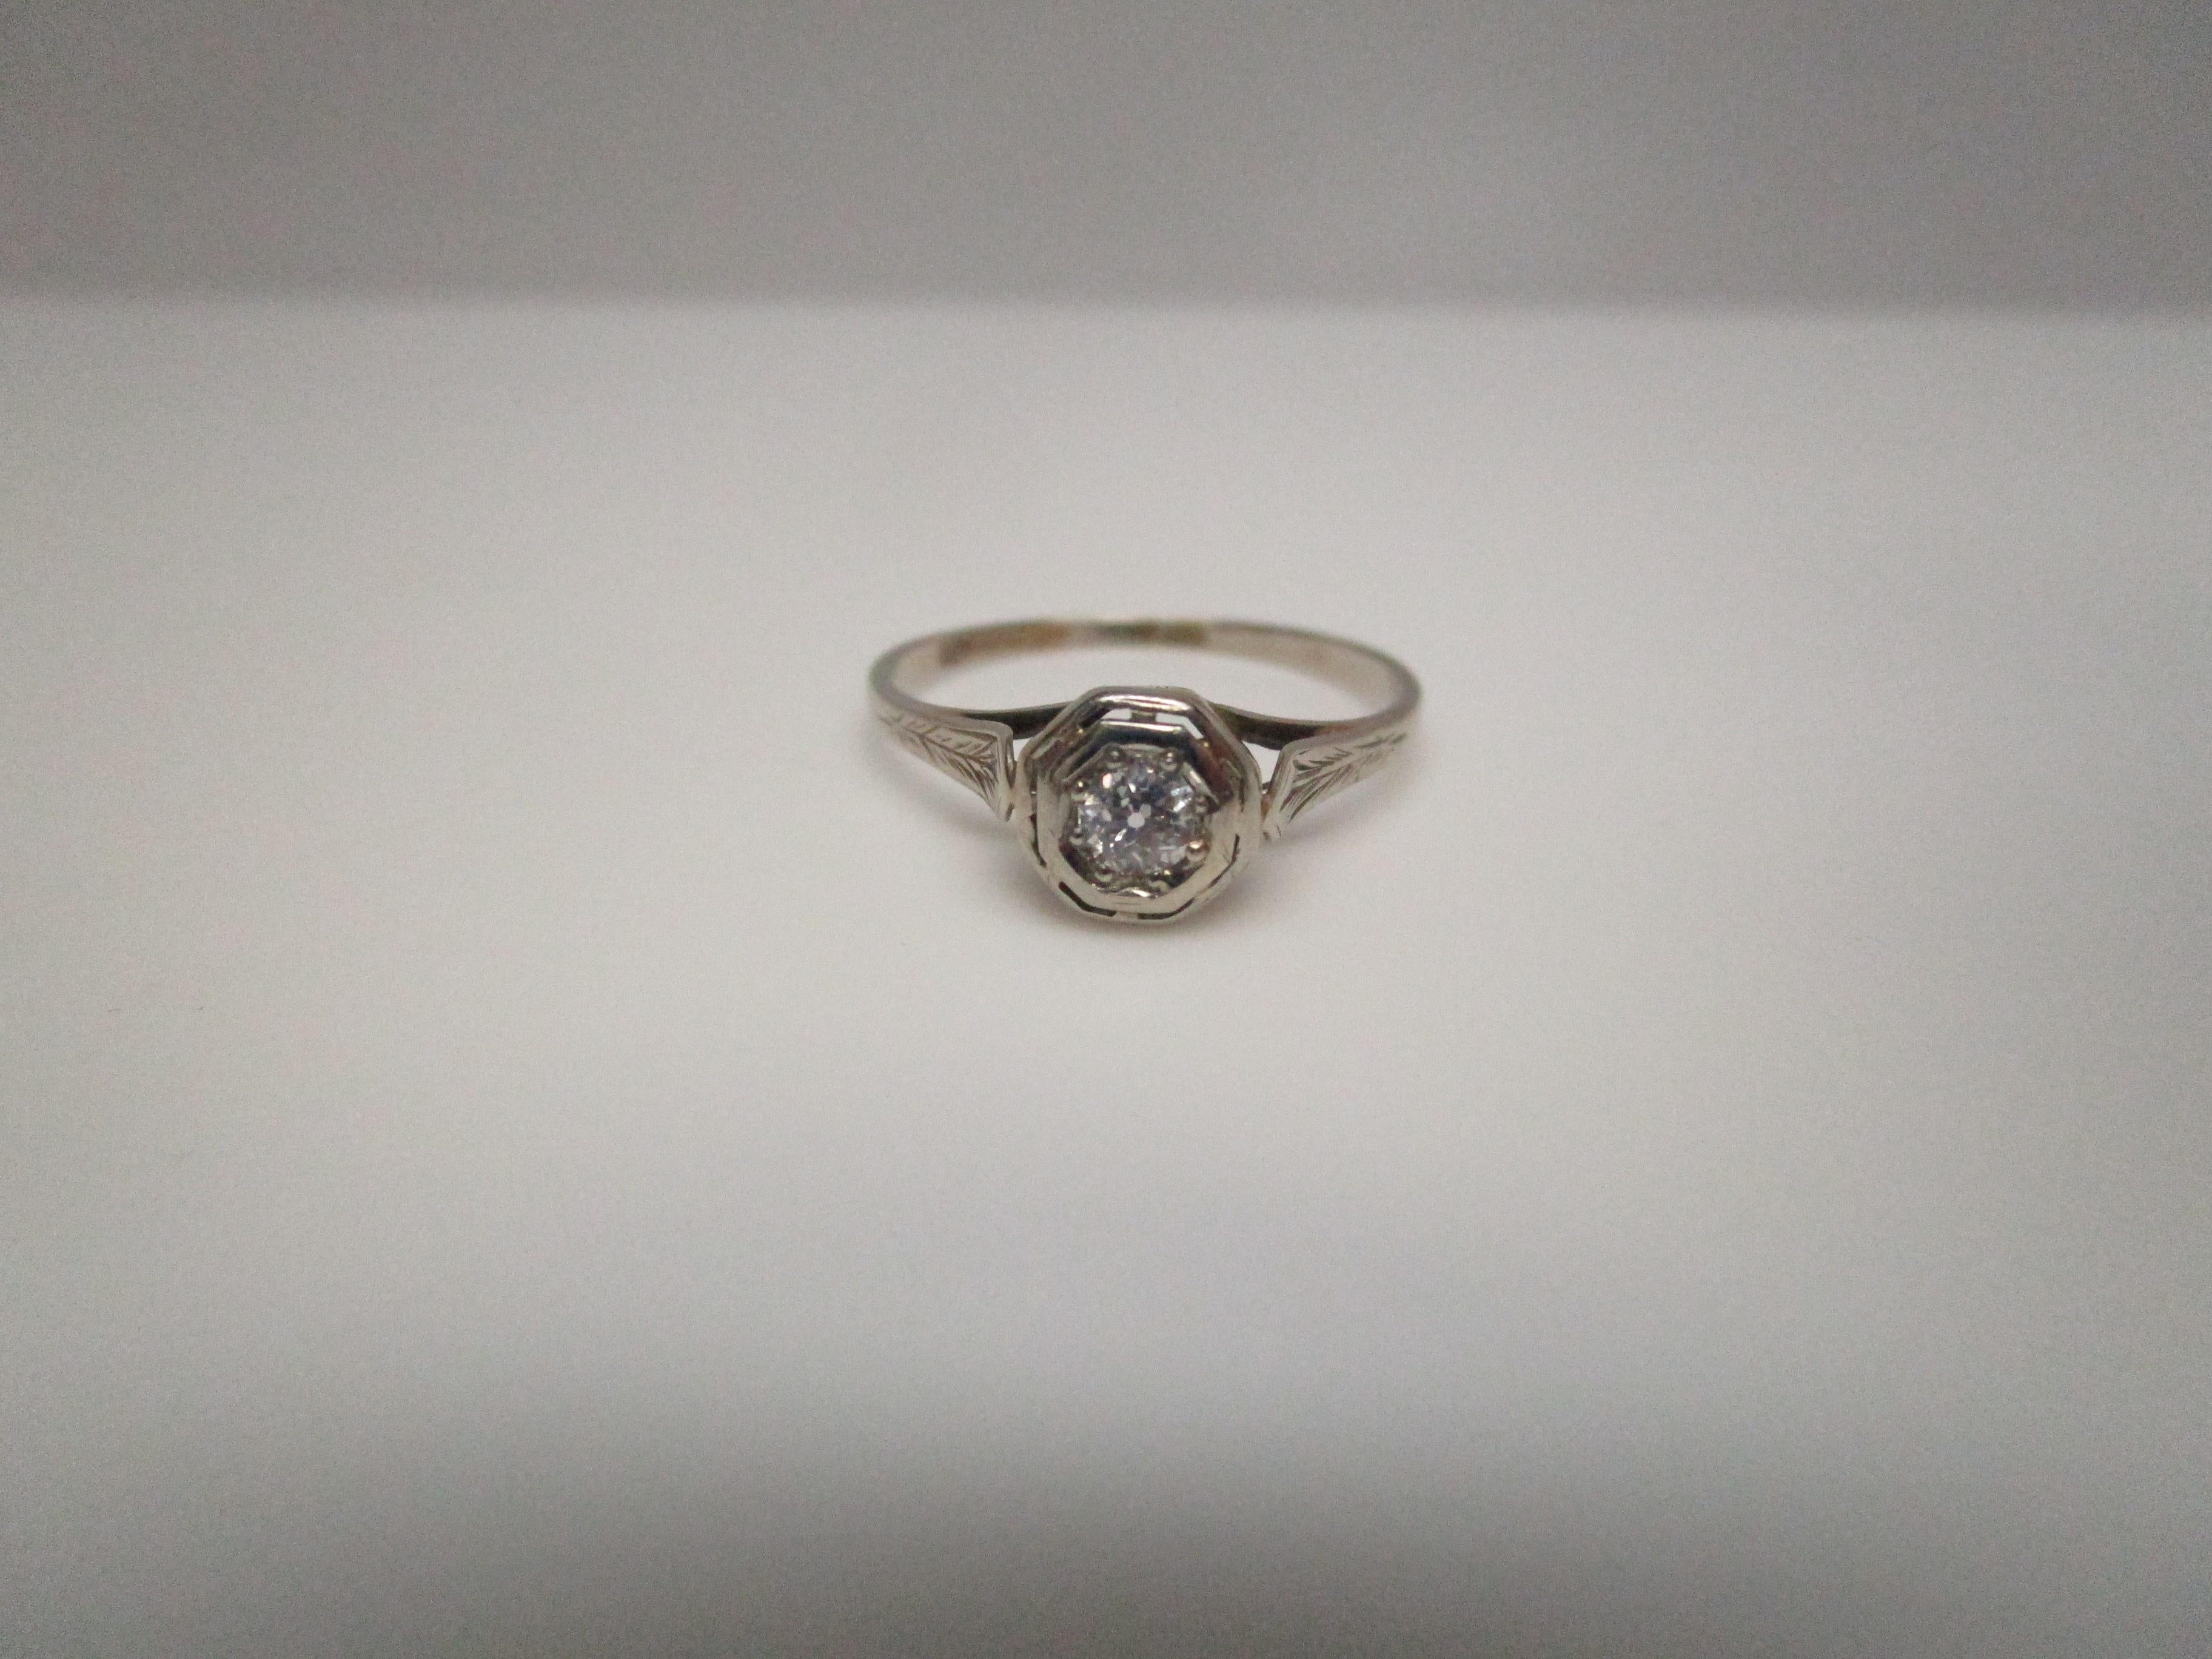 18 Karat White Art Deco Gold Filigree Diamond Ring In Excellent Condition For Sale In Lexington, KY